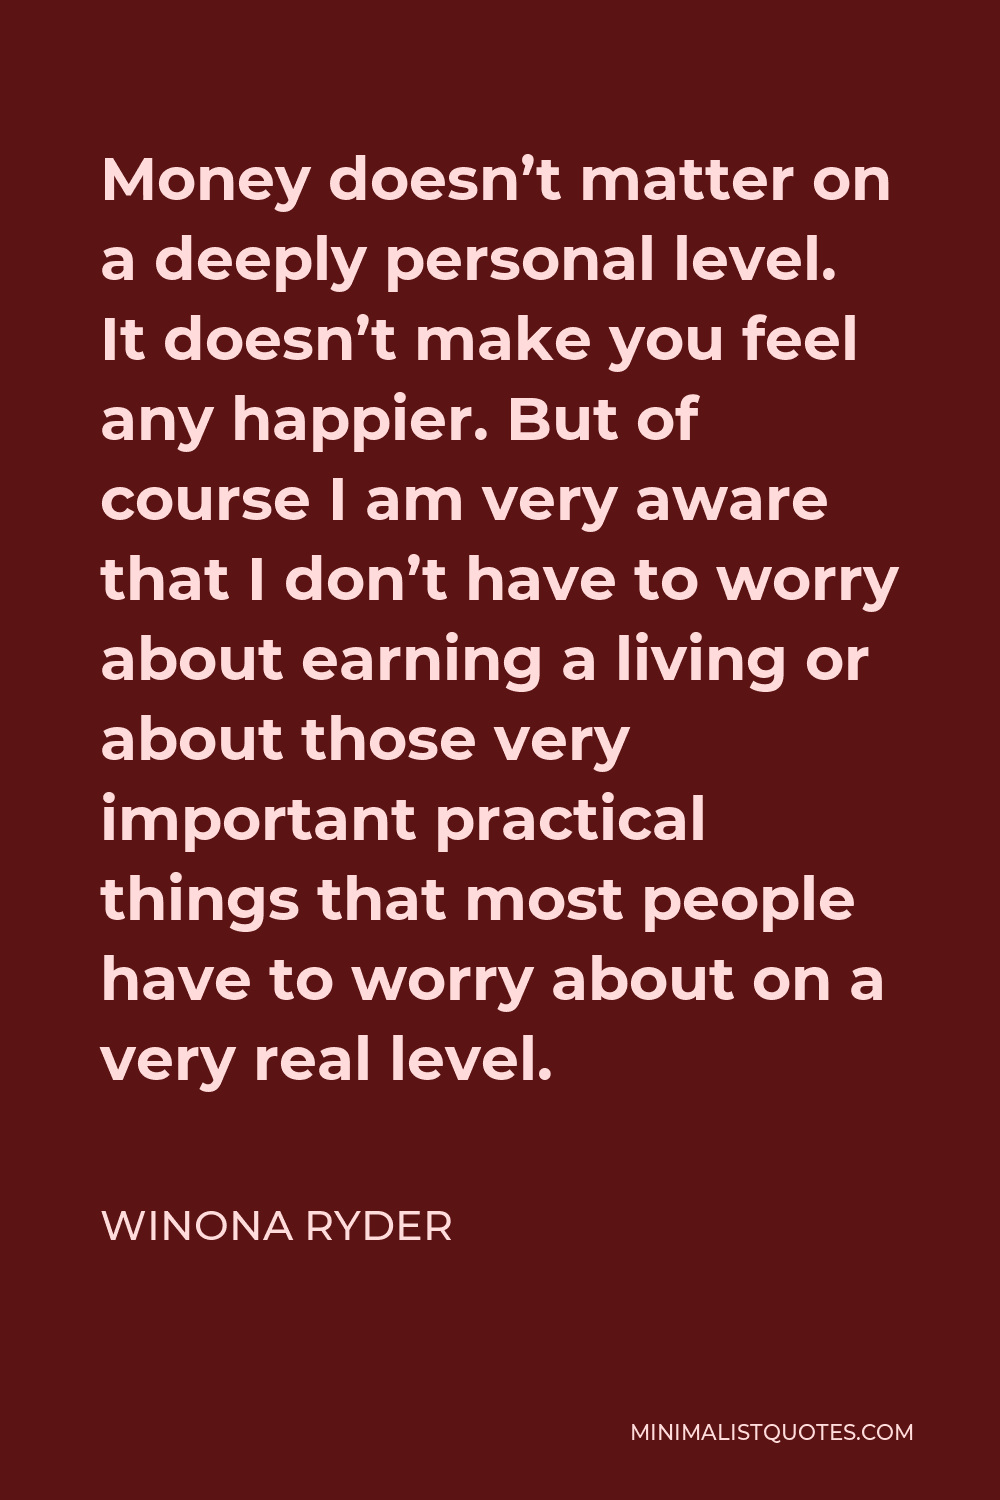 Winona Ryder Quote - Money doesn’t matter on a deeply personal level. It doesn’t make you feel any happier. But of course I am very aware that I don’t have to worry about earning a living or about those very important practical things that most people have to worry about on a very real level.